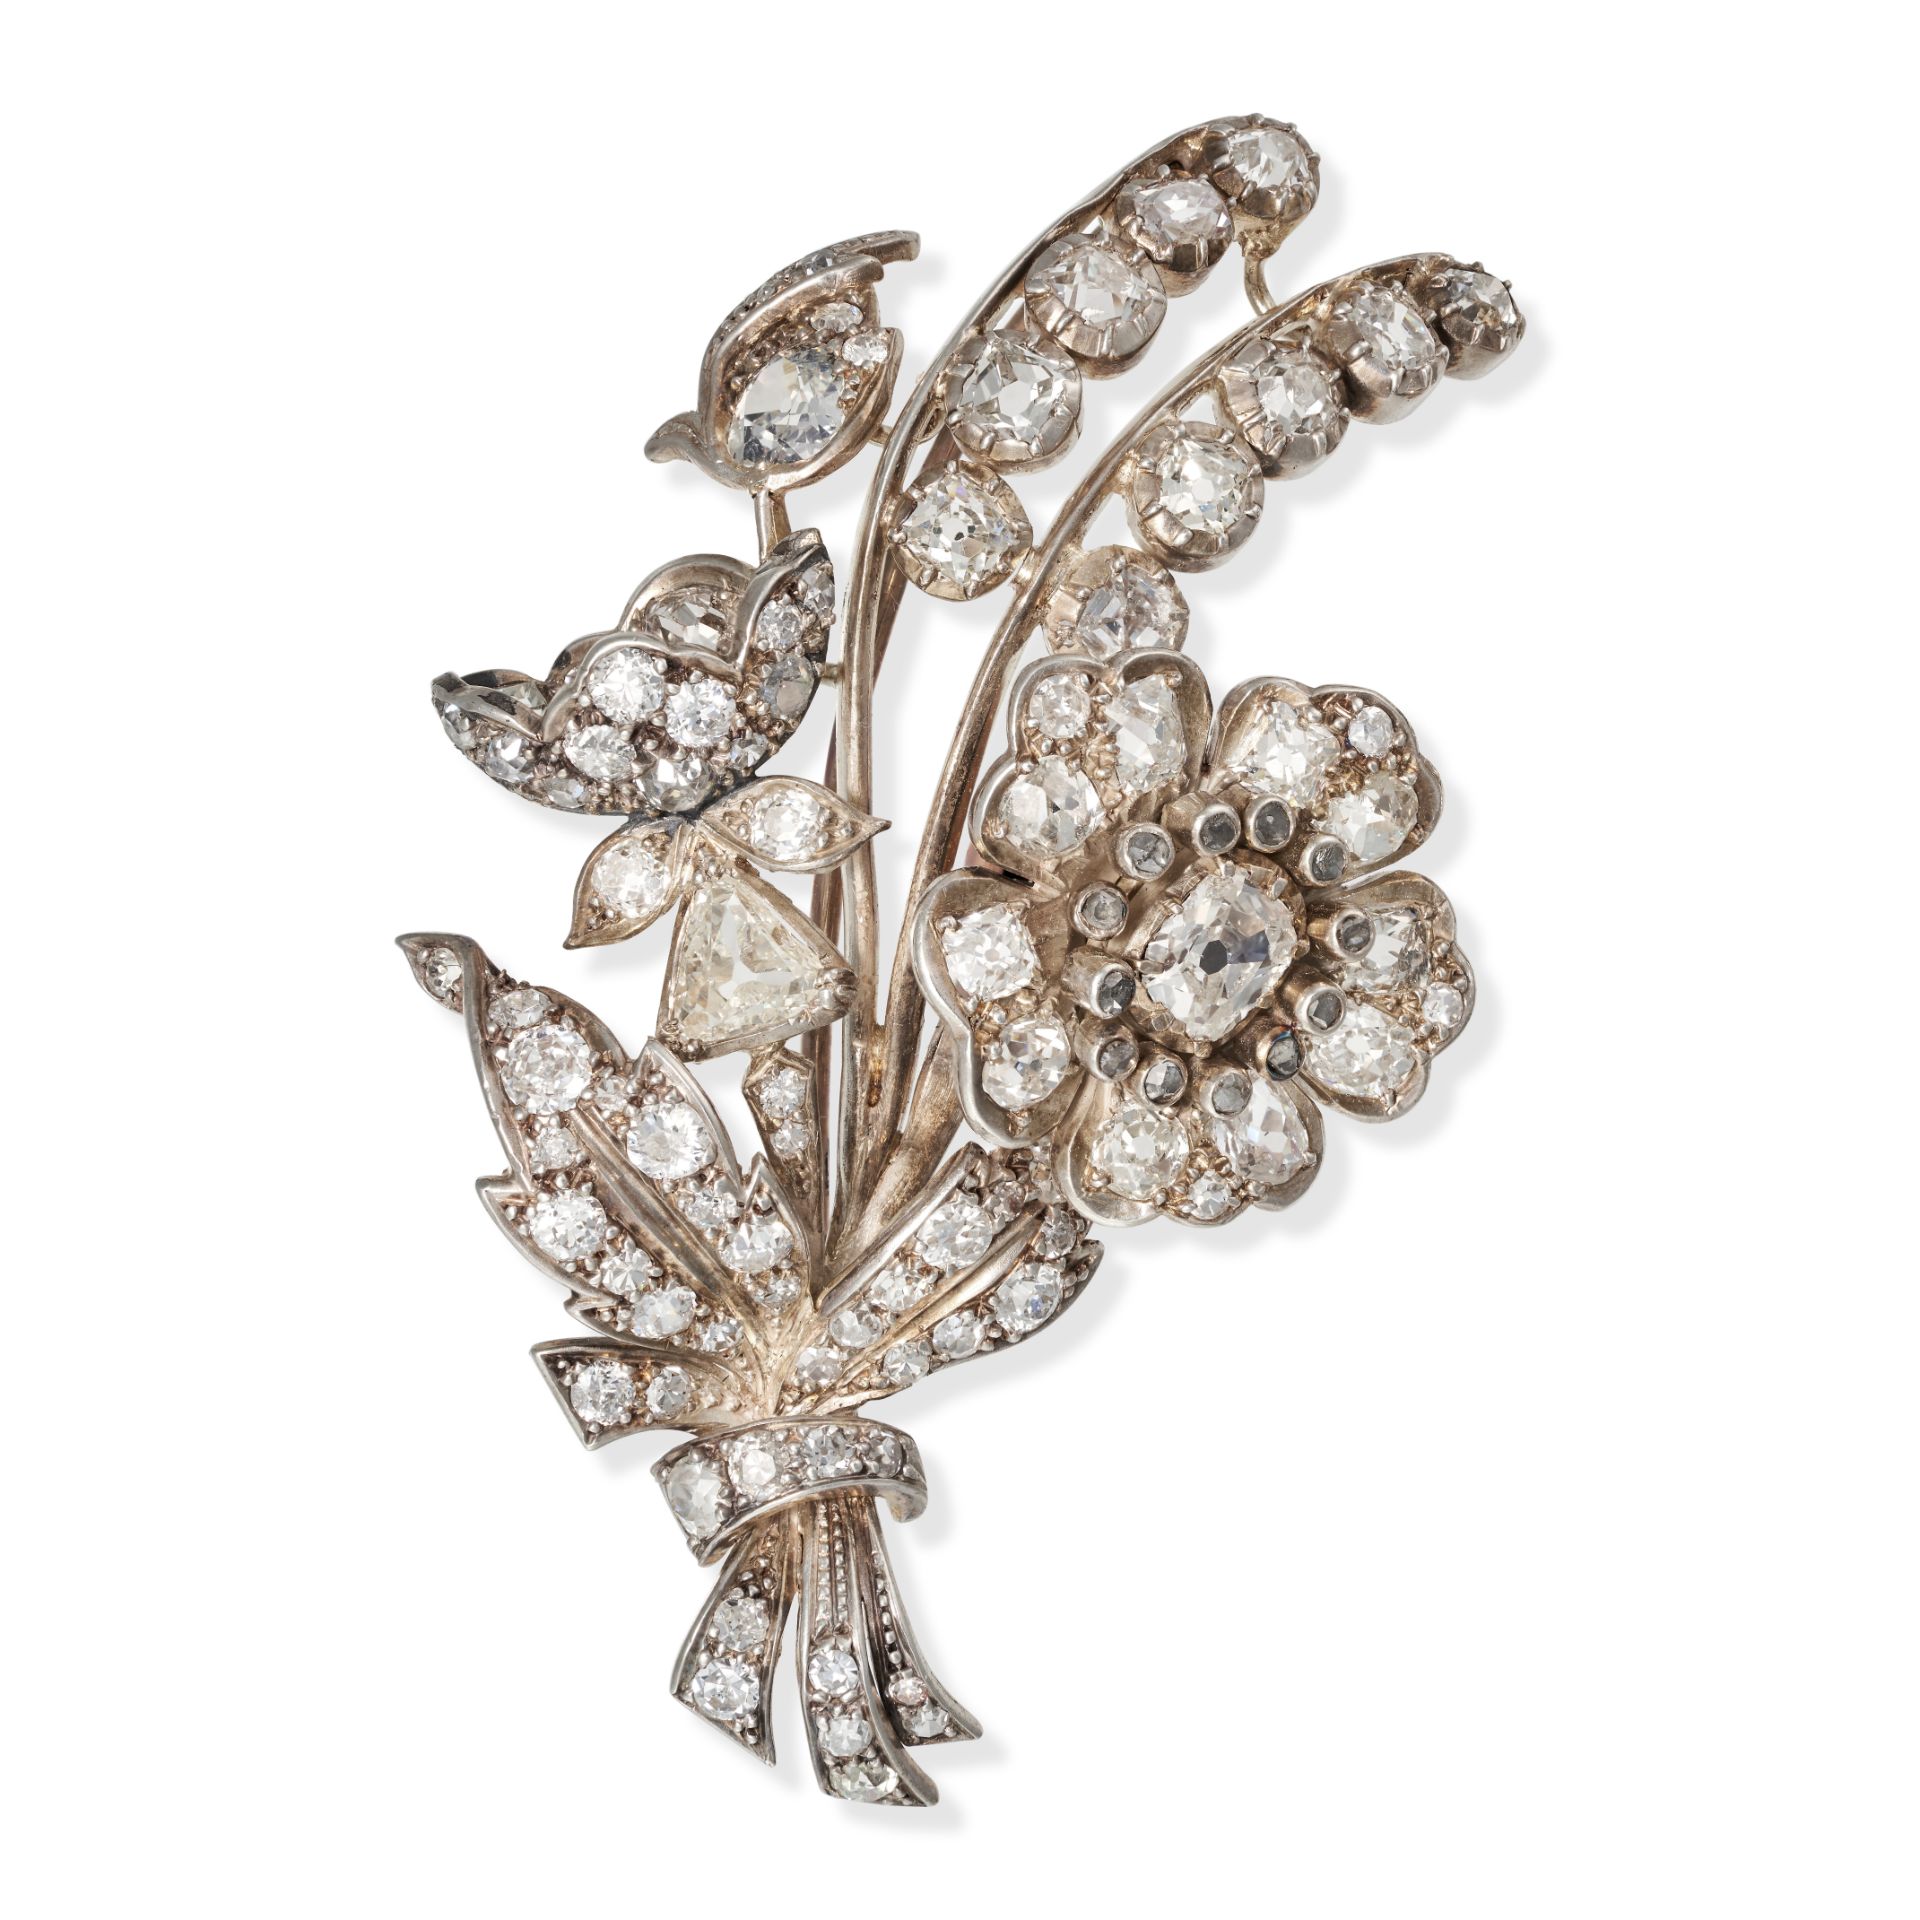 AN ANTIQUE DIAMOND EN TREMBLANT FLORAL SPRAY BROOCH in yellow gold and silver, designed as a flor...